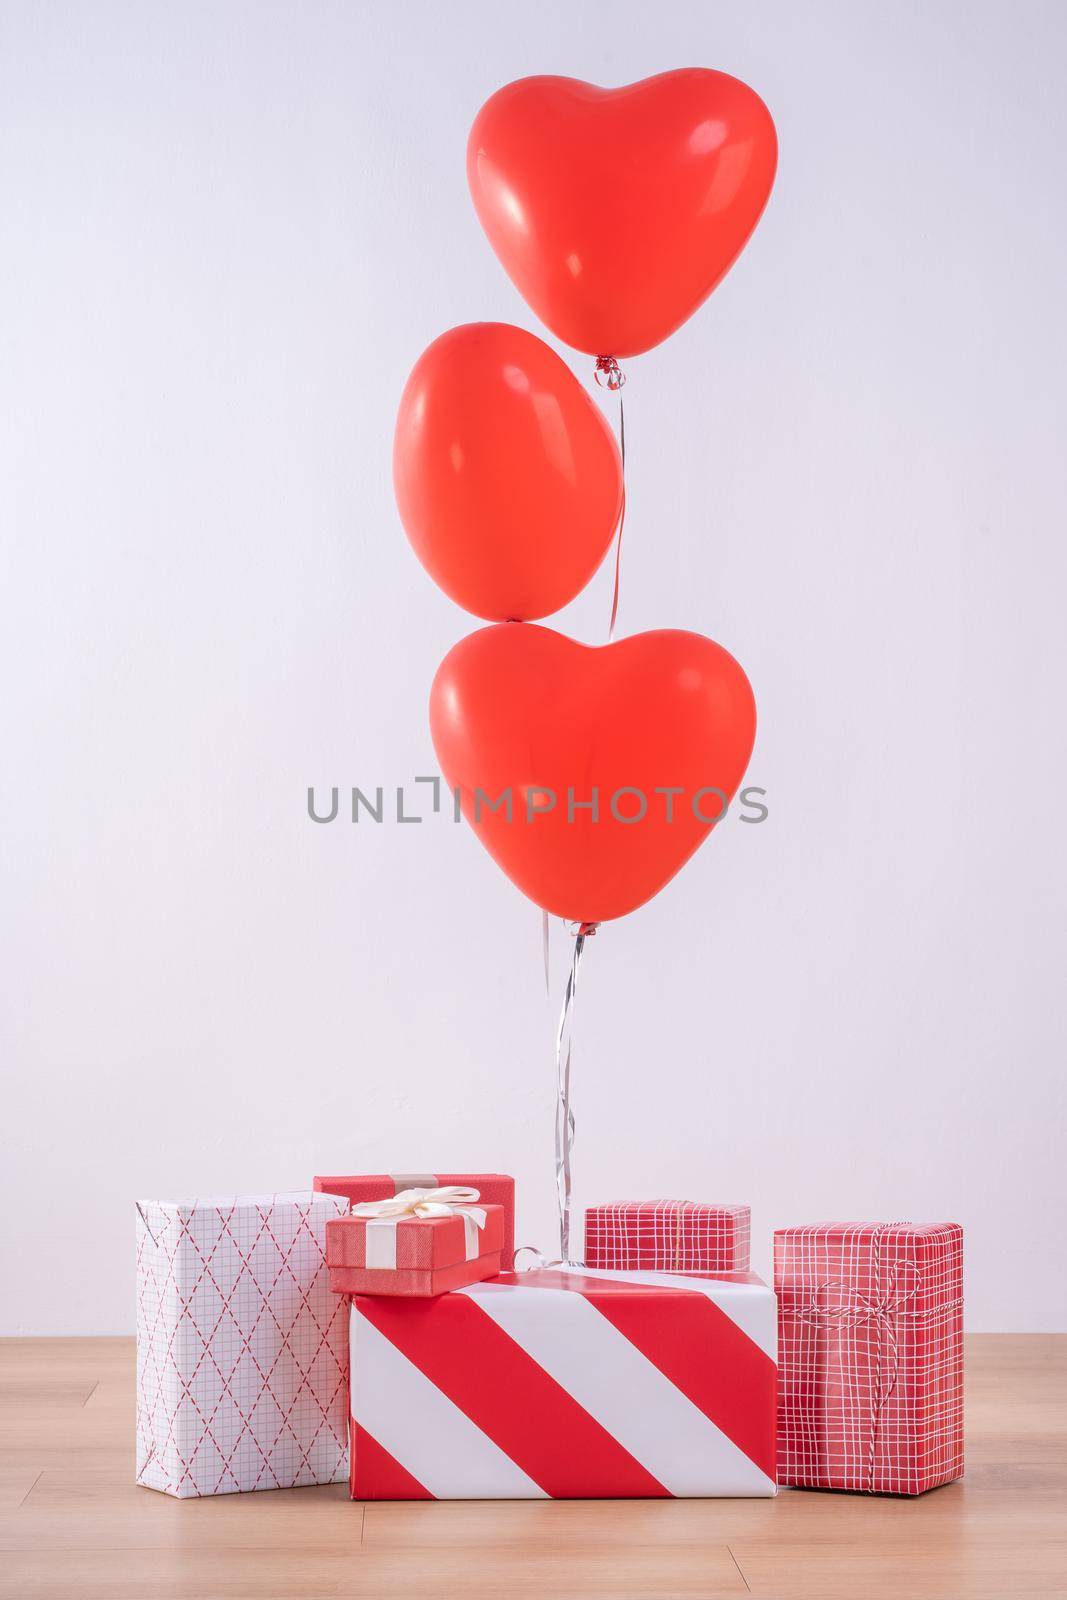 Valentine's day, Mother's day, birthday design concept - Heart helium balloon with gift box on a light wood floor, white wall background, close up.